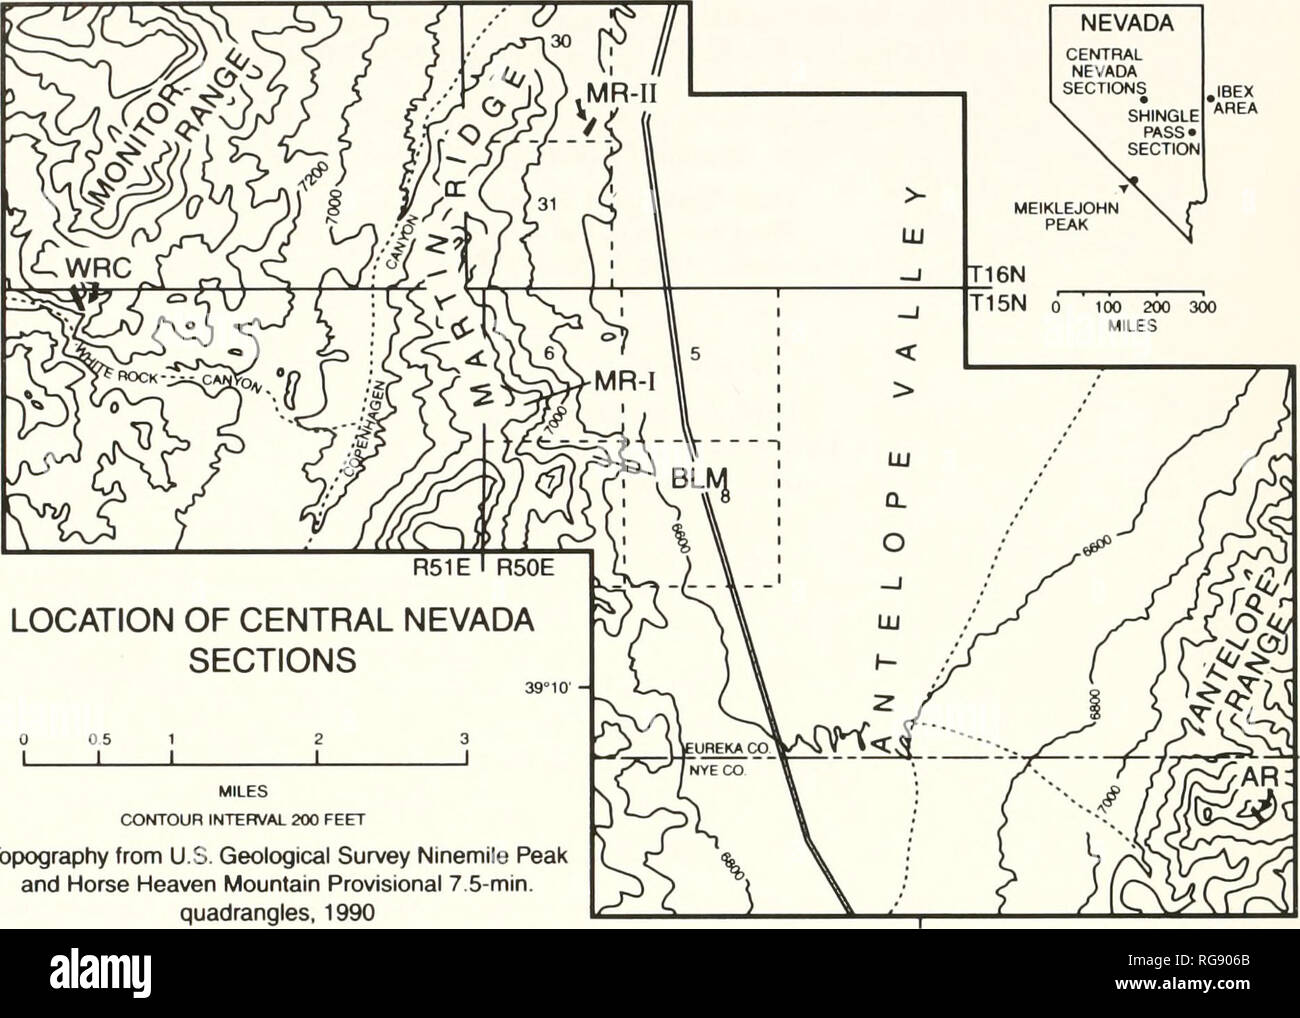 . Bulletins of American paleontology. 36 Bulletin 369 -IBEX AREA. Topography from U.S. Geological Survey Ninemlle Peak and Horse Heaven Mountain Provisional 7.5-min. quadrangles, 1990 116°20' Text-figure .—Location of central Nevada sections considered in this report. WRC = Whilerock Canyon section; BLM = BLM Fence section; MR-I = Martin Ridge South section; MR-II = Martin Ridge North section; AR = Hill 8308 section. Antelope Range. Inset outline map of Nevada also shows approximate location of the Meiklejohn Peak. Ibex .-^rea, and Shingle Pass sections with which central Nevada sections are  Stock Photo